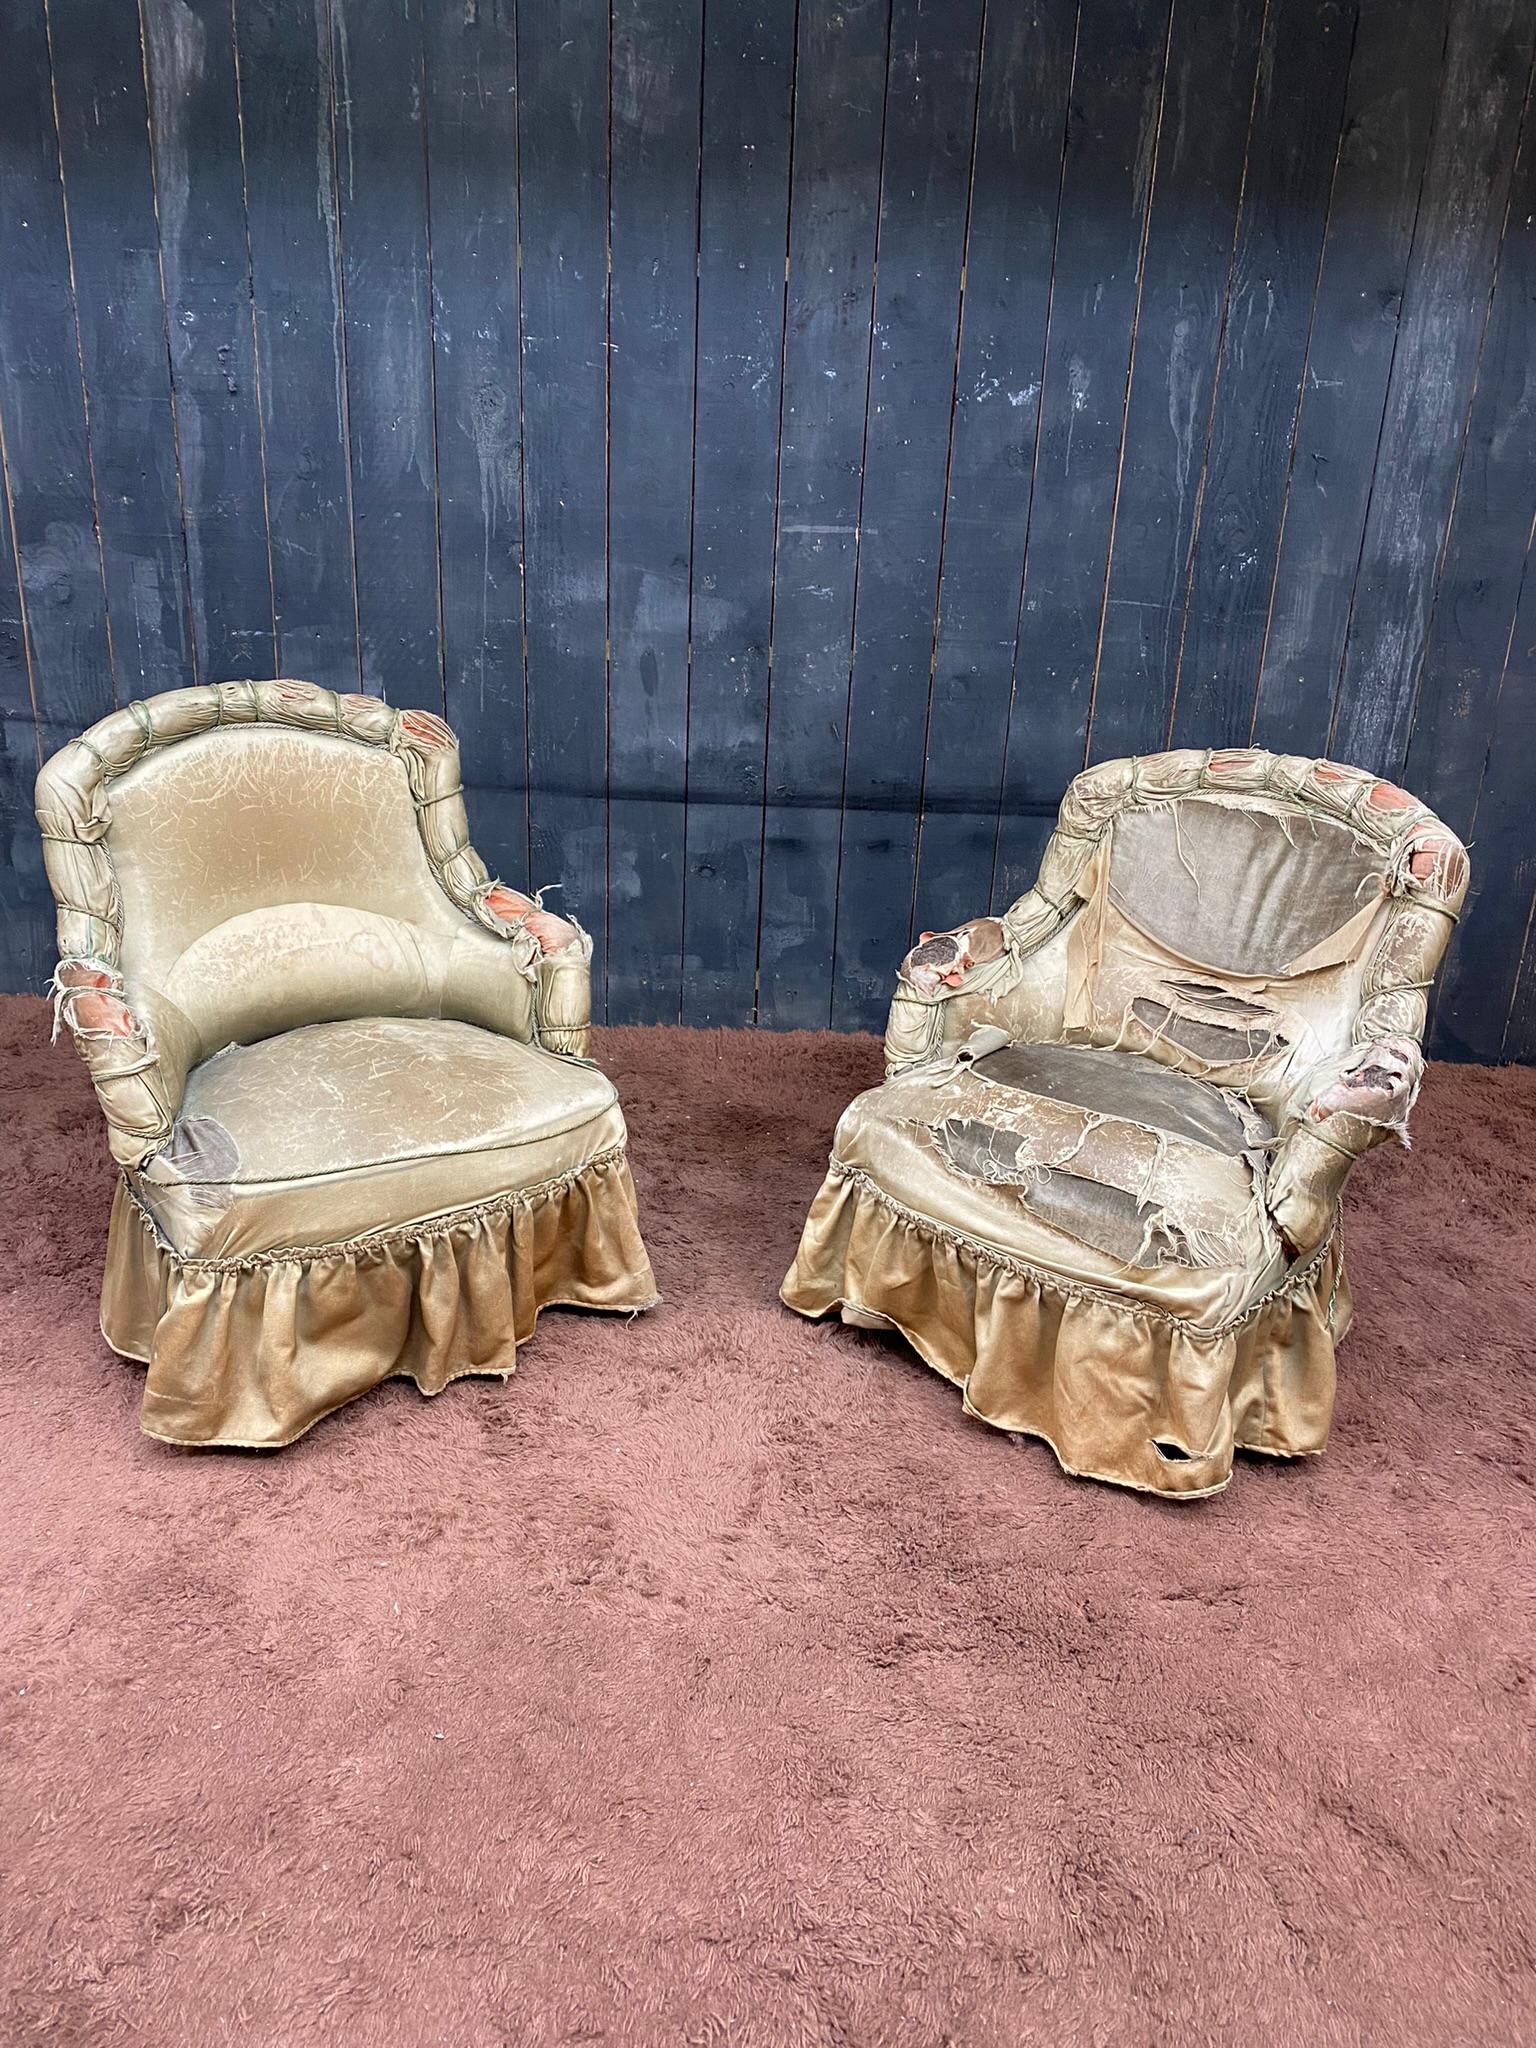 Pair of Napoléon III low chairs
to cover.